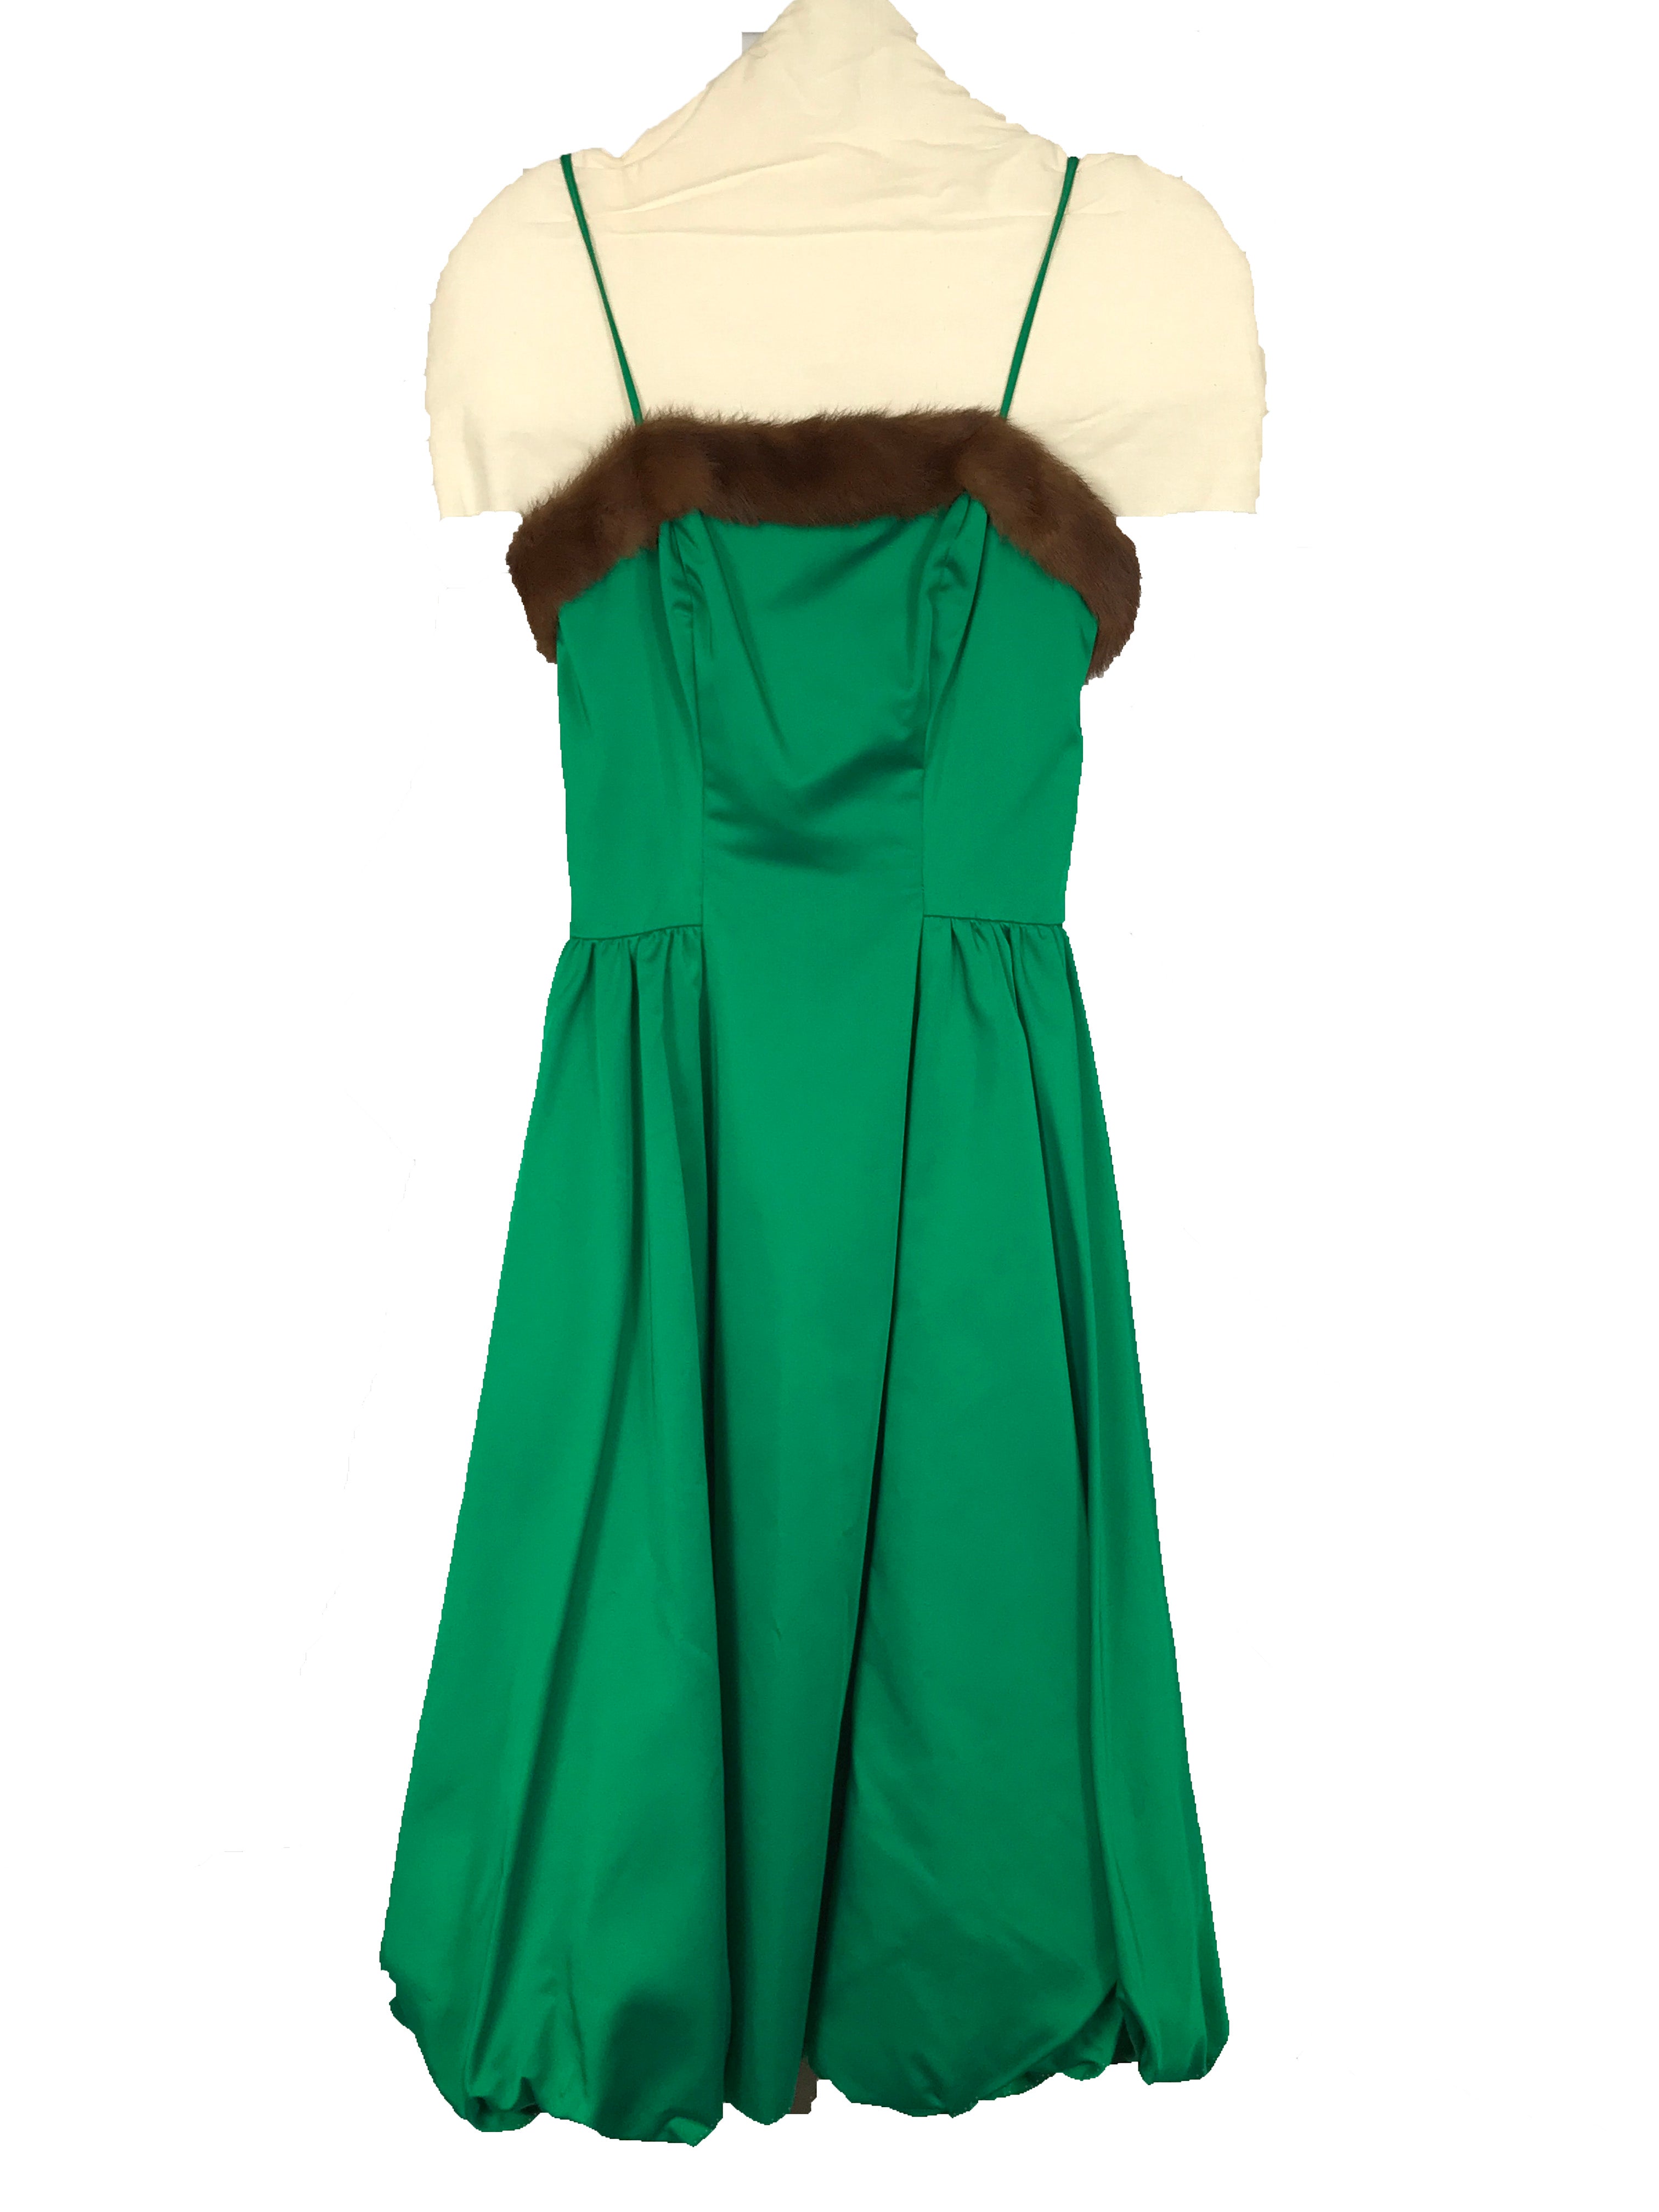 Vintage Mitzi Morgan Exclusively Neusteters Green Satin Evening Gown with Fur Trim Women's Size 7